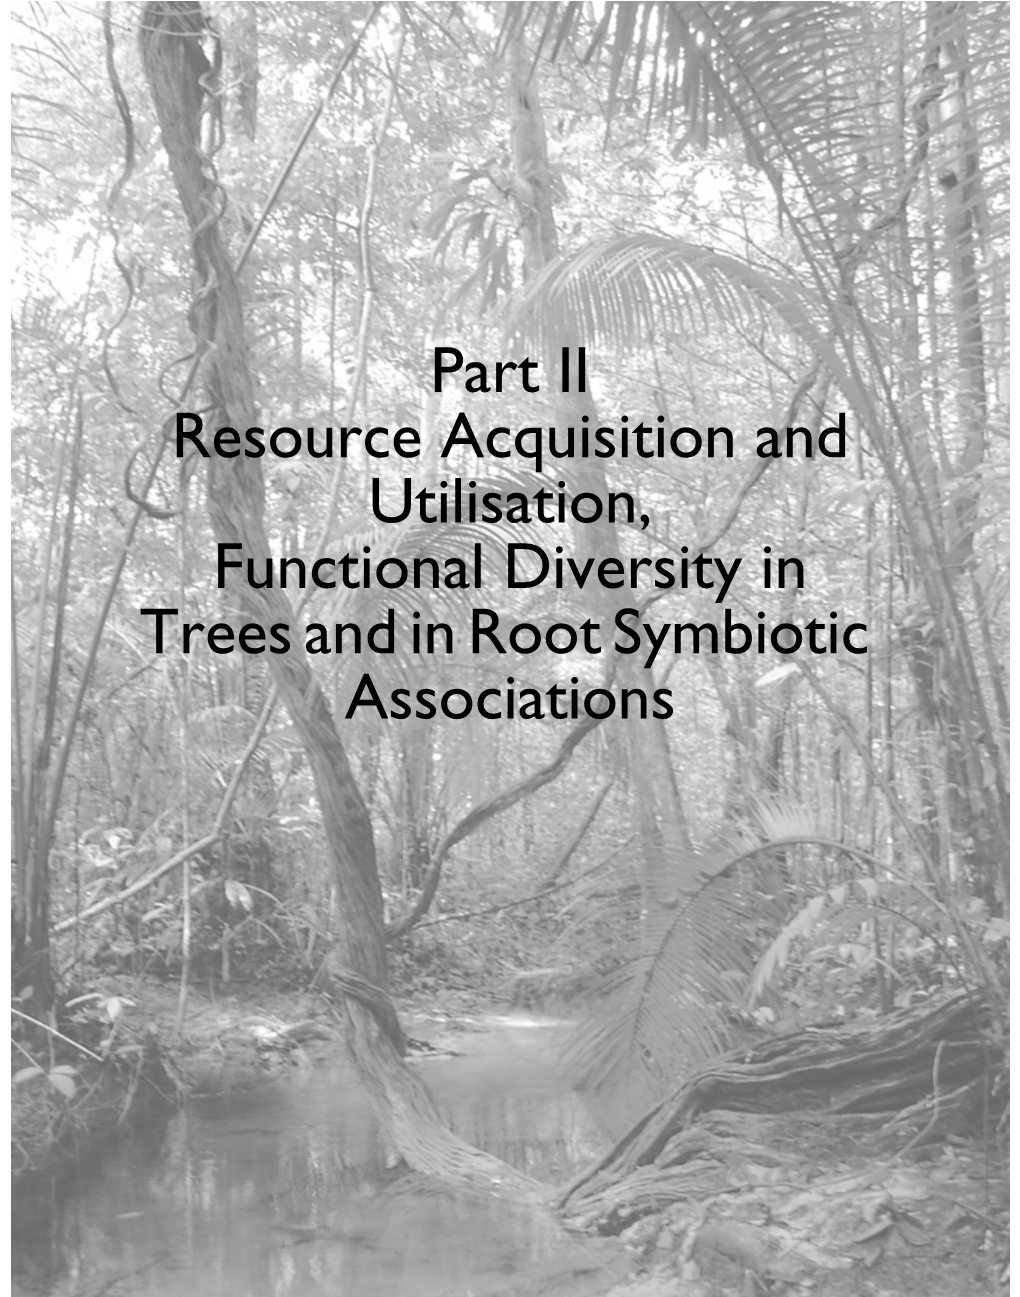 Part II Resource Acquisition and Utilisation, Functional Diversity in Trees and in Root Symbiotic Associations